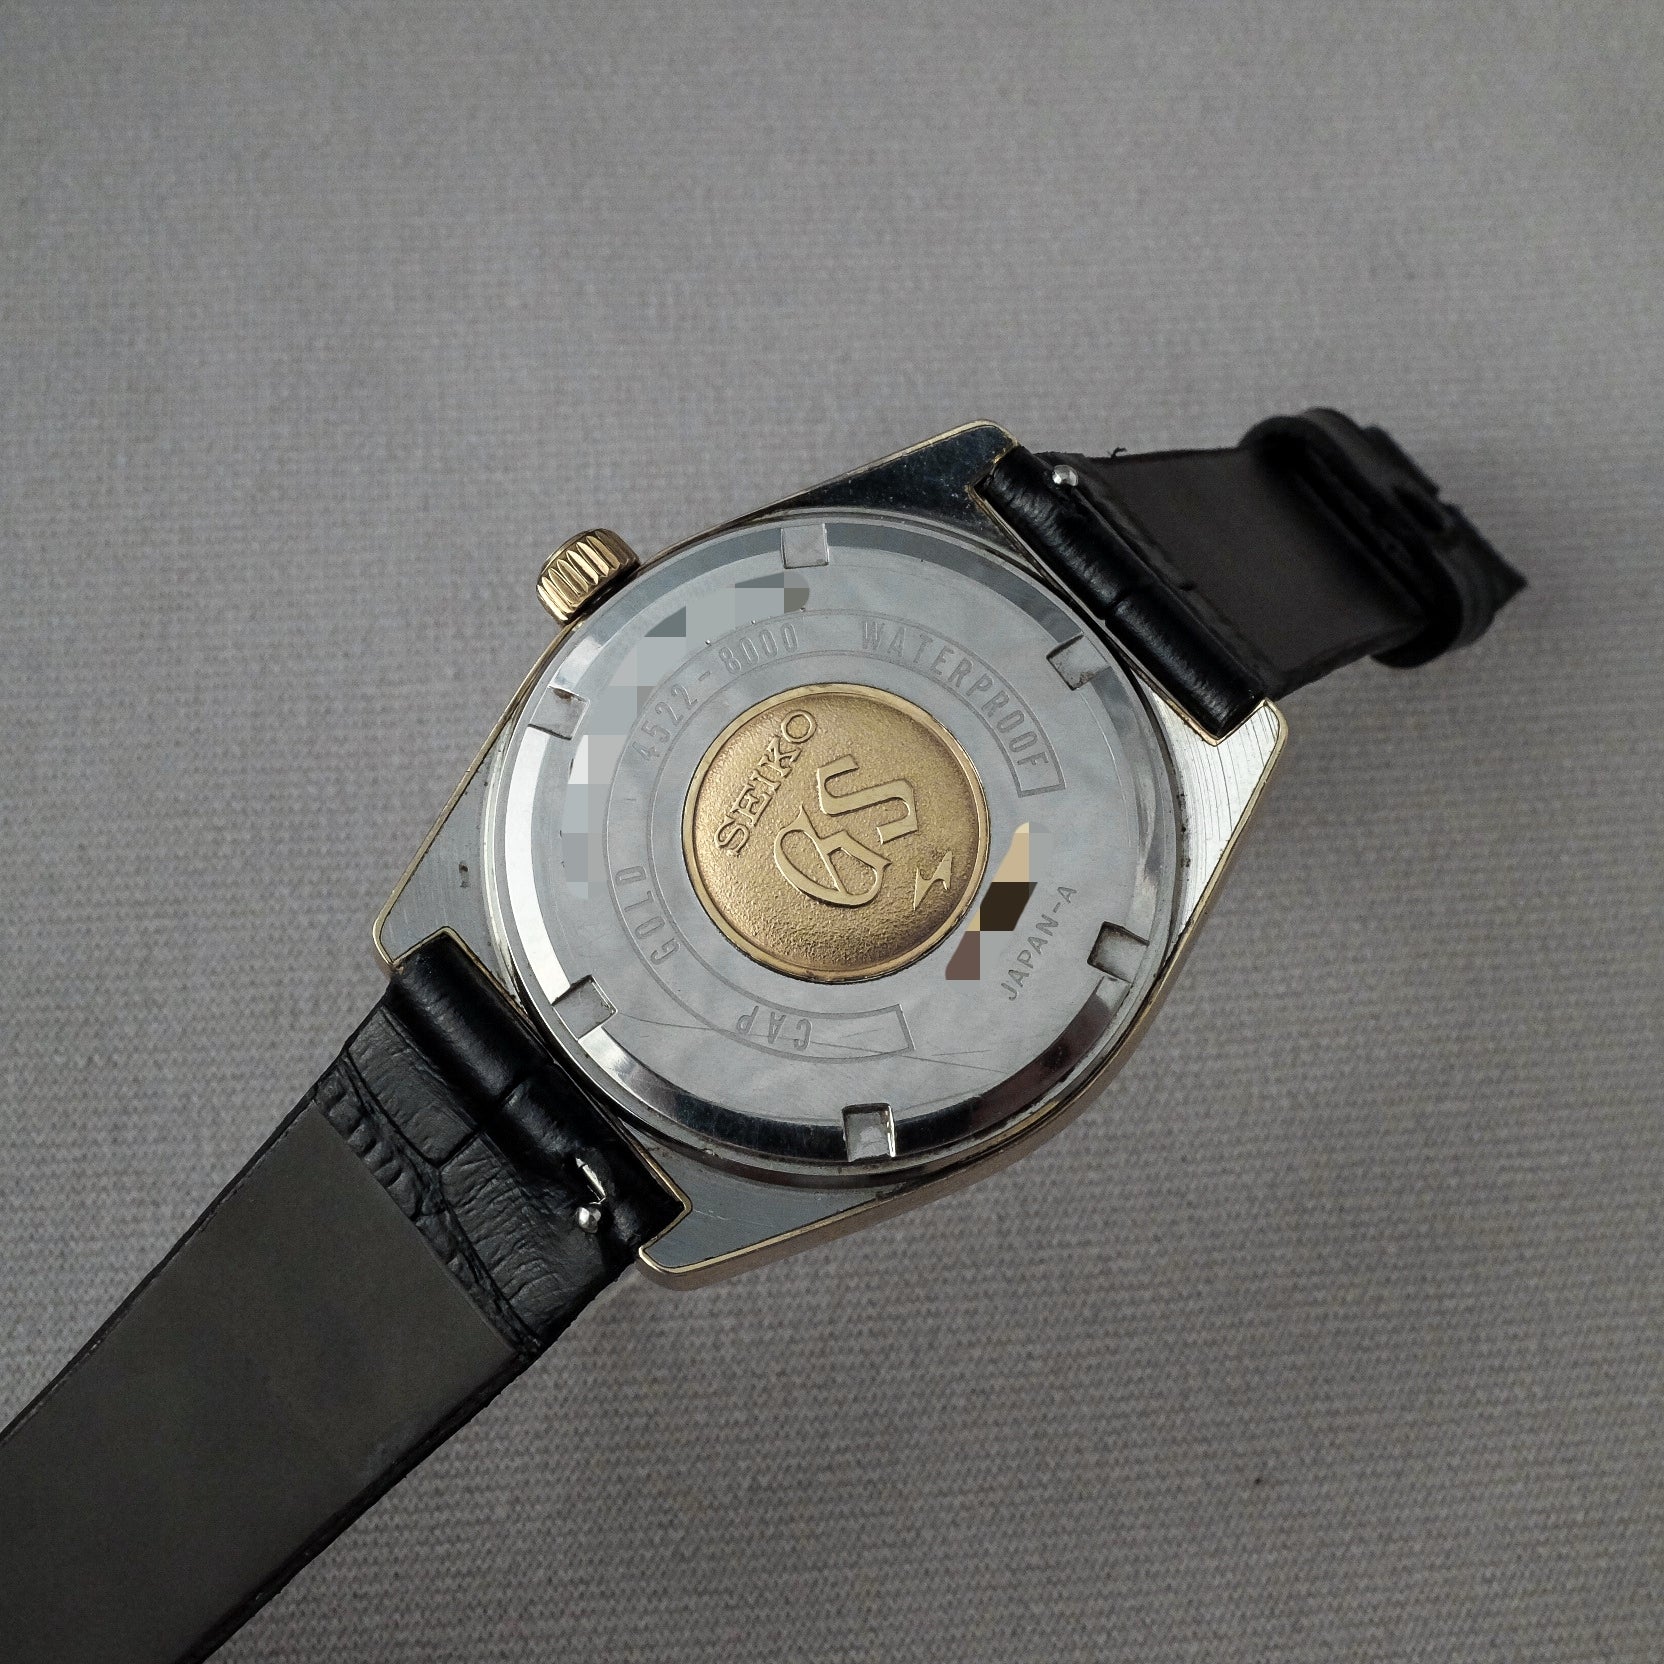 Grand Seiko 4522-8000 from 1980 (Gold Cap)